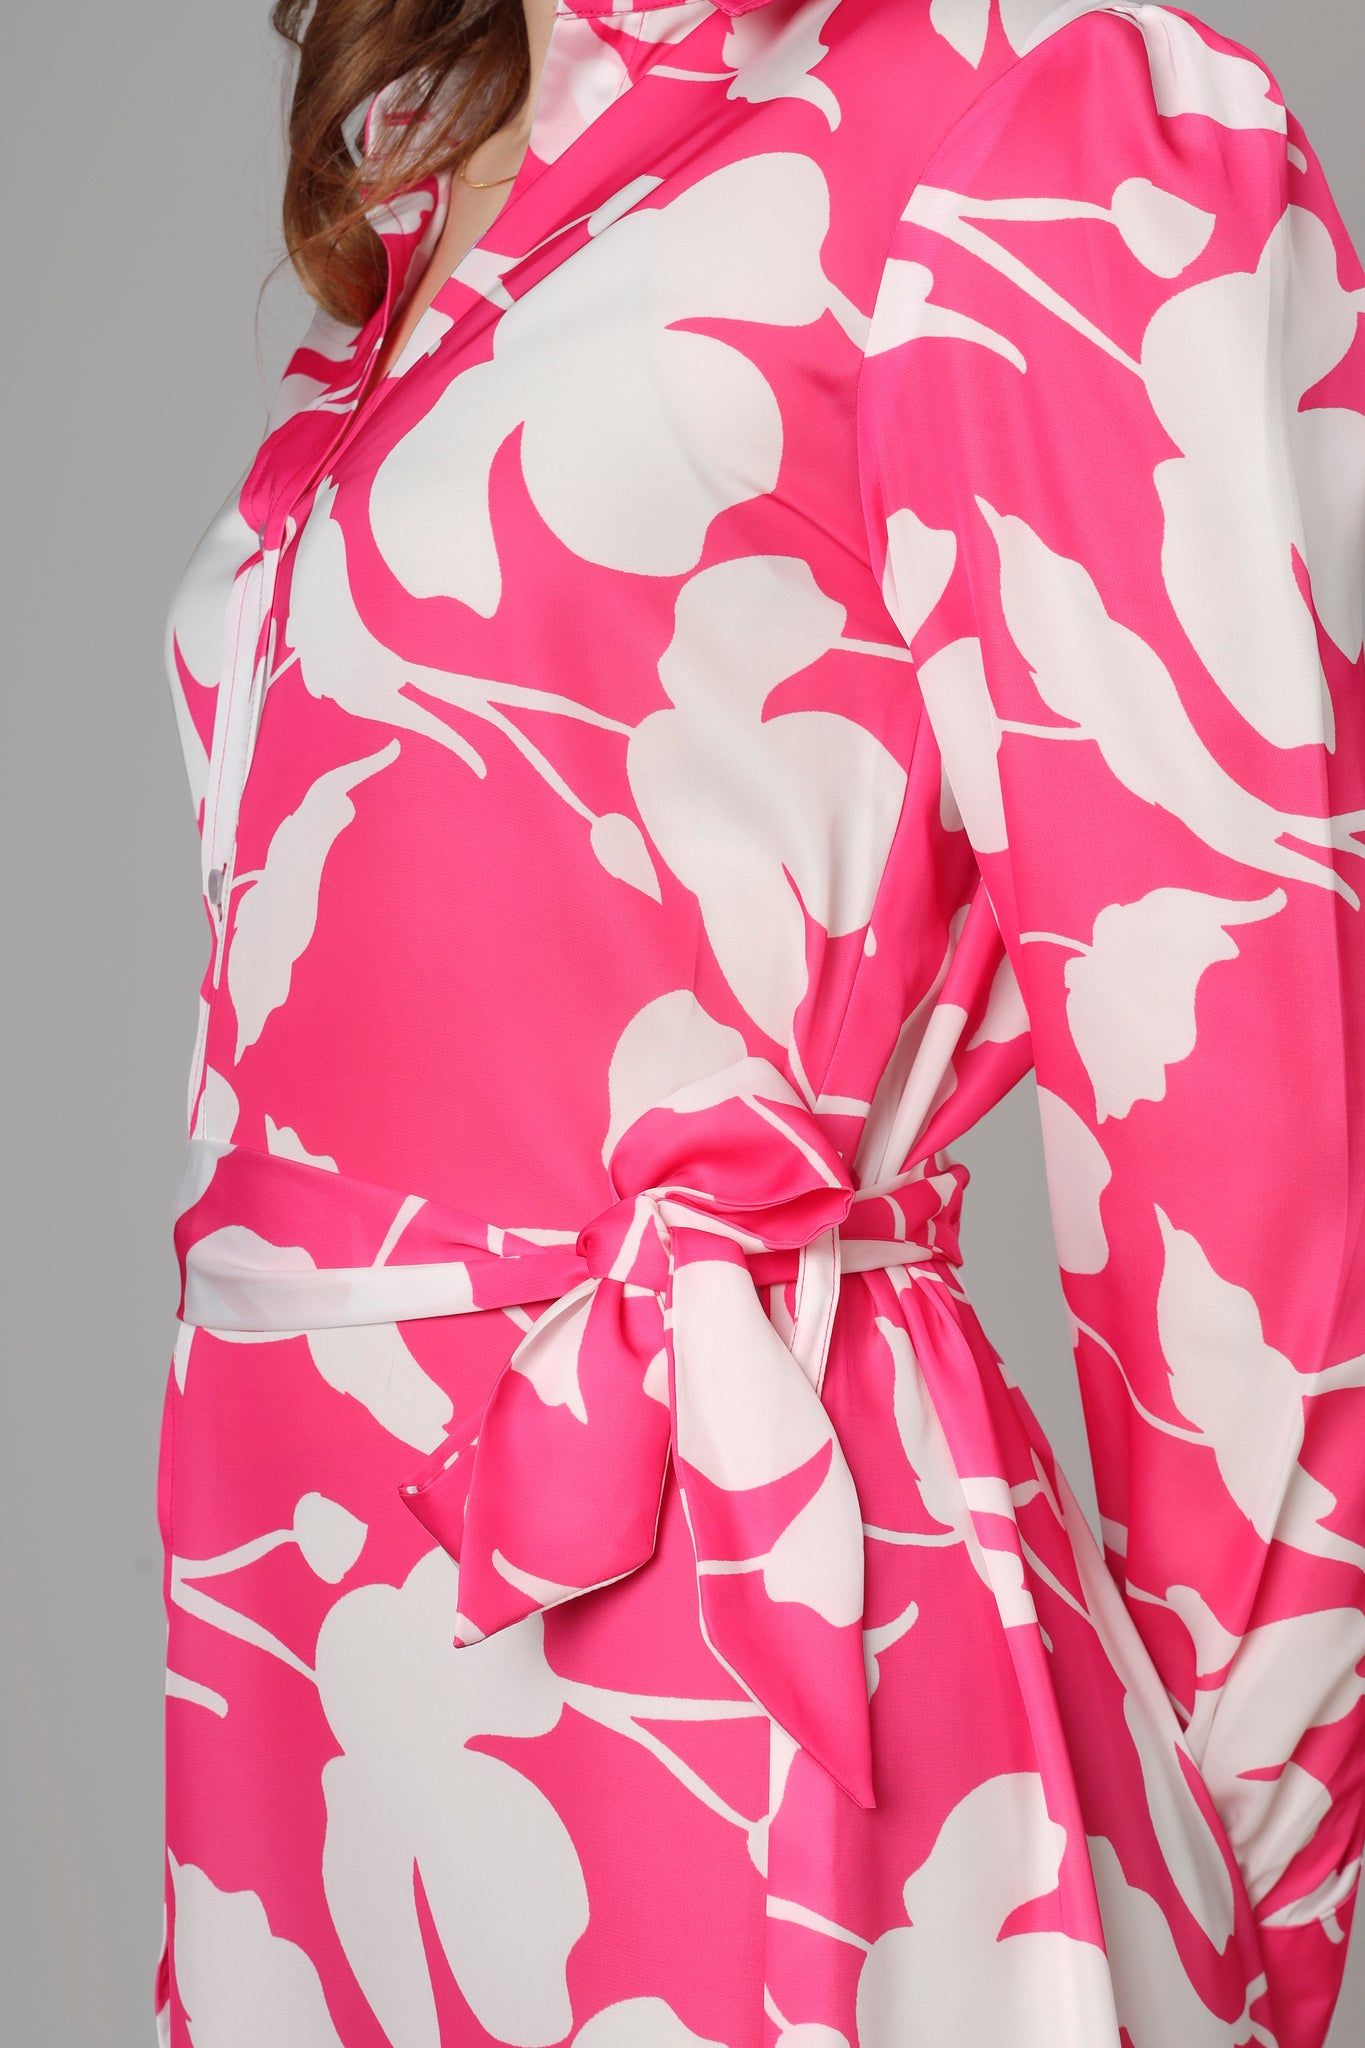 Attractive Pink Floral Dress For Women